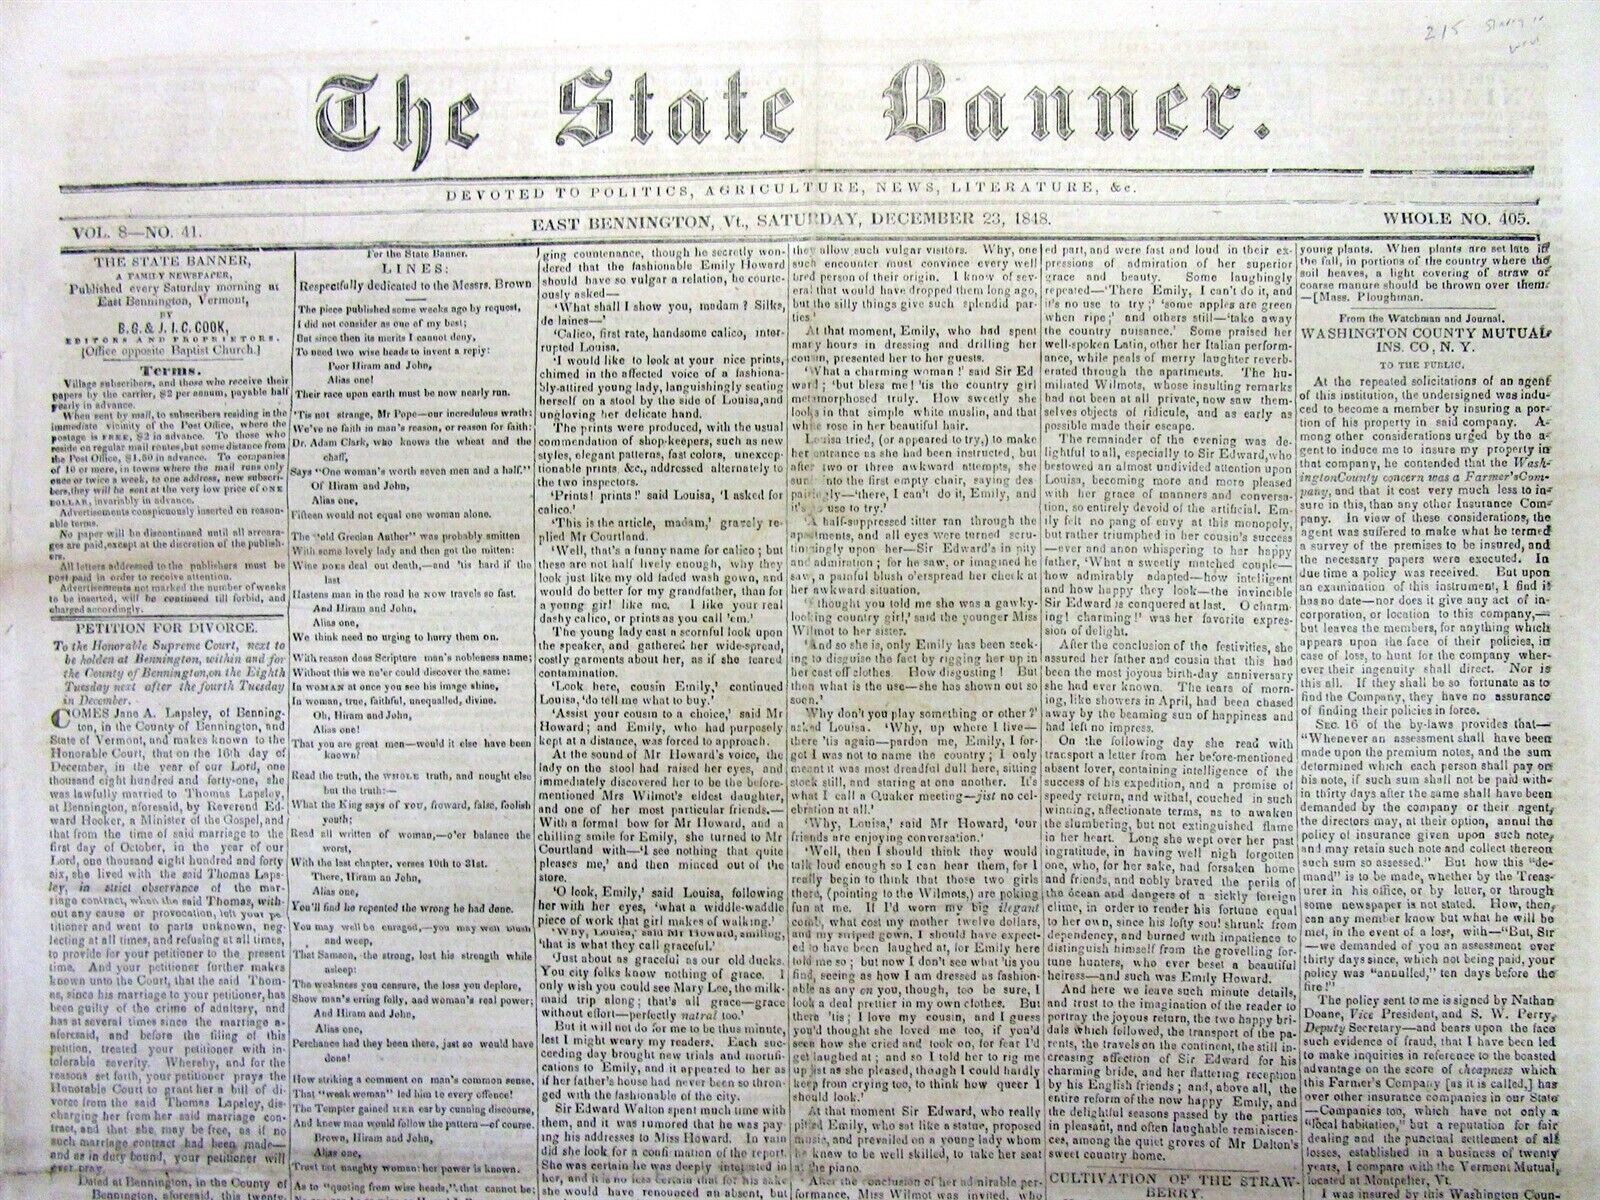 1848 newspaper with the expansion of SLAVERY in CALIFORNIA during THE GOLD RUSH